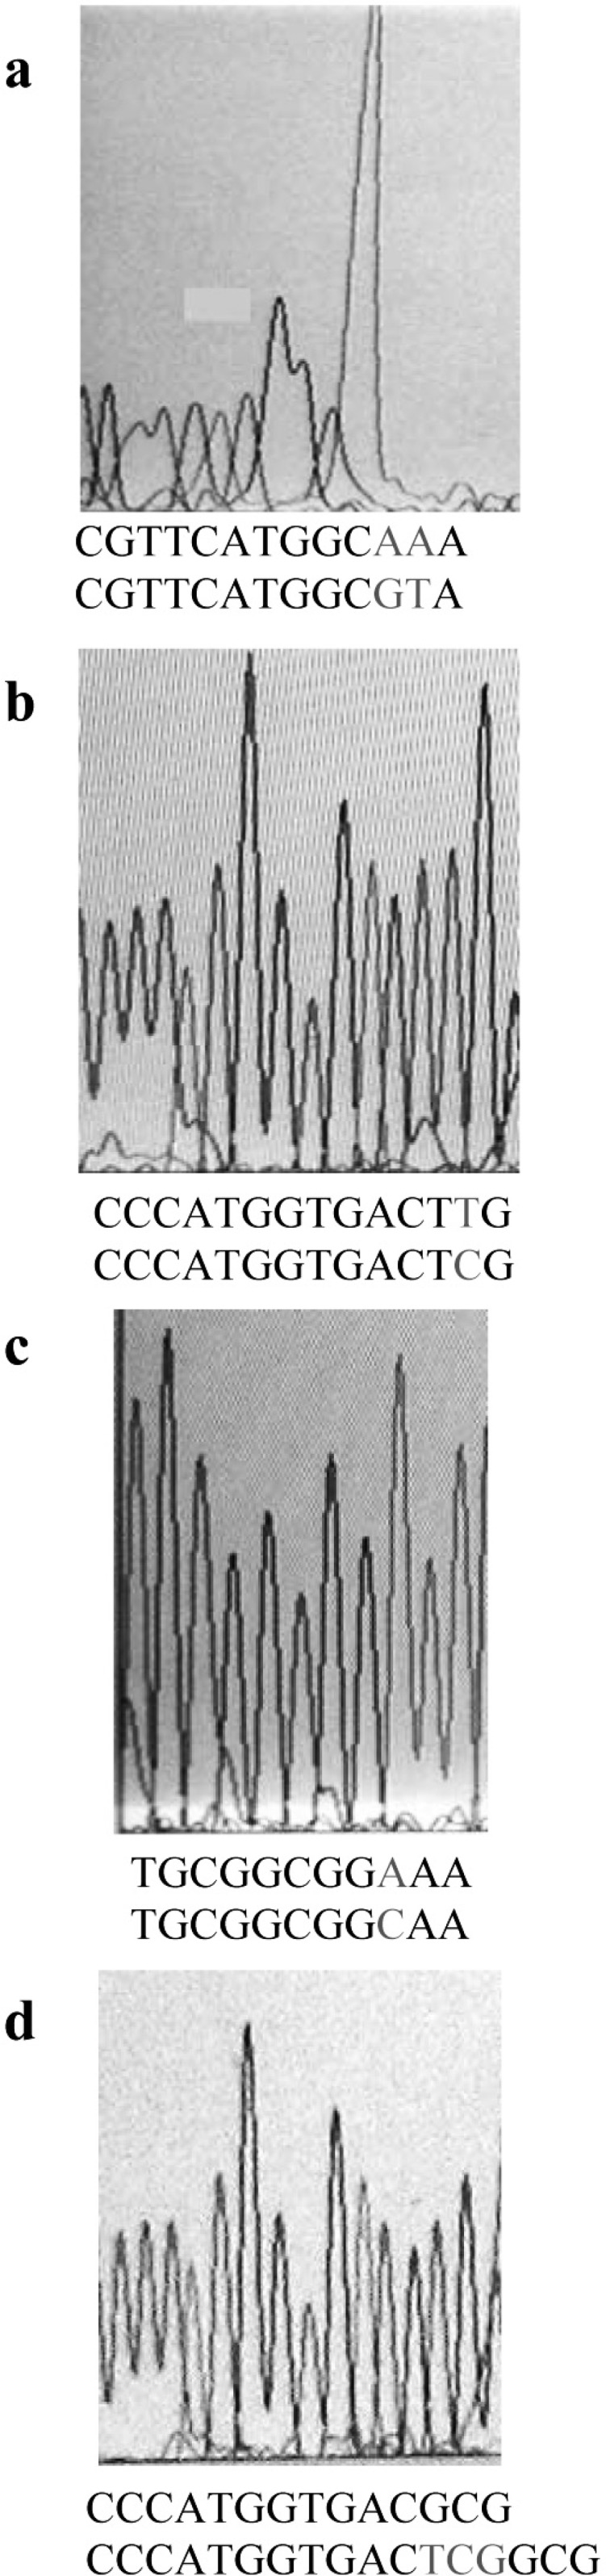 Sequence output from the PCR products of different CFX-resistant mutants, using forward or reverse primer. On the bottom of each graph, the first and second nucleotide sequences belong to mutant and wild type gyrA, respectively